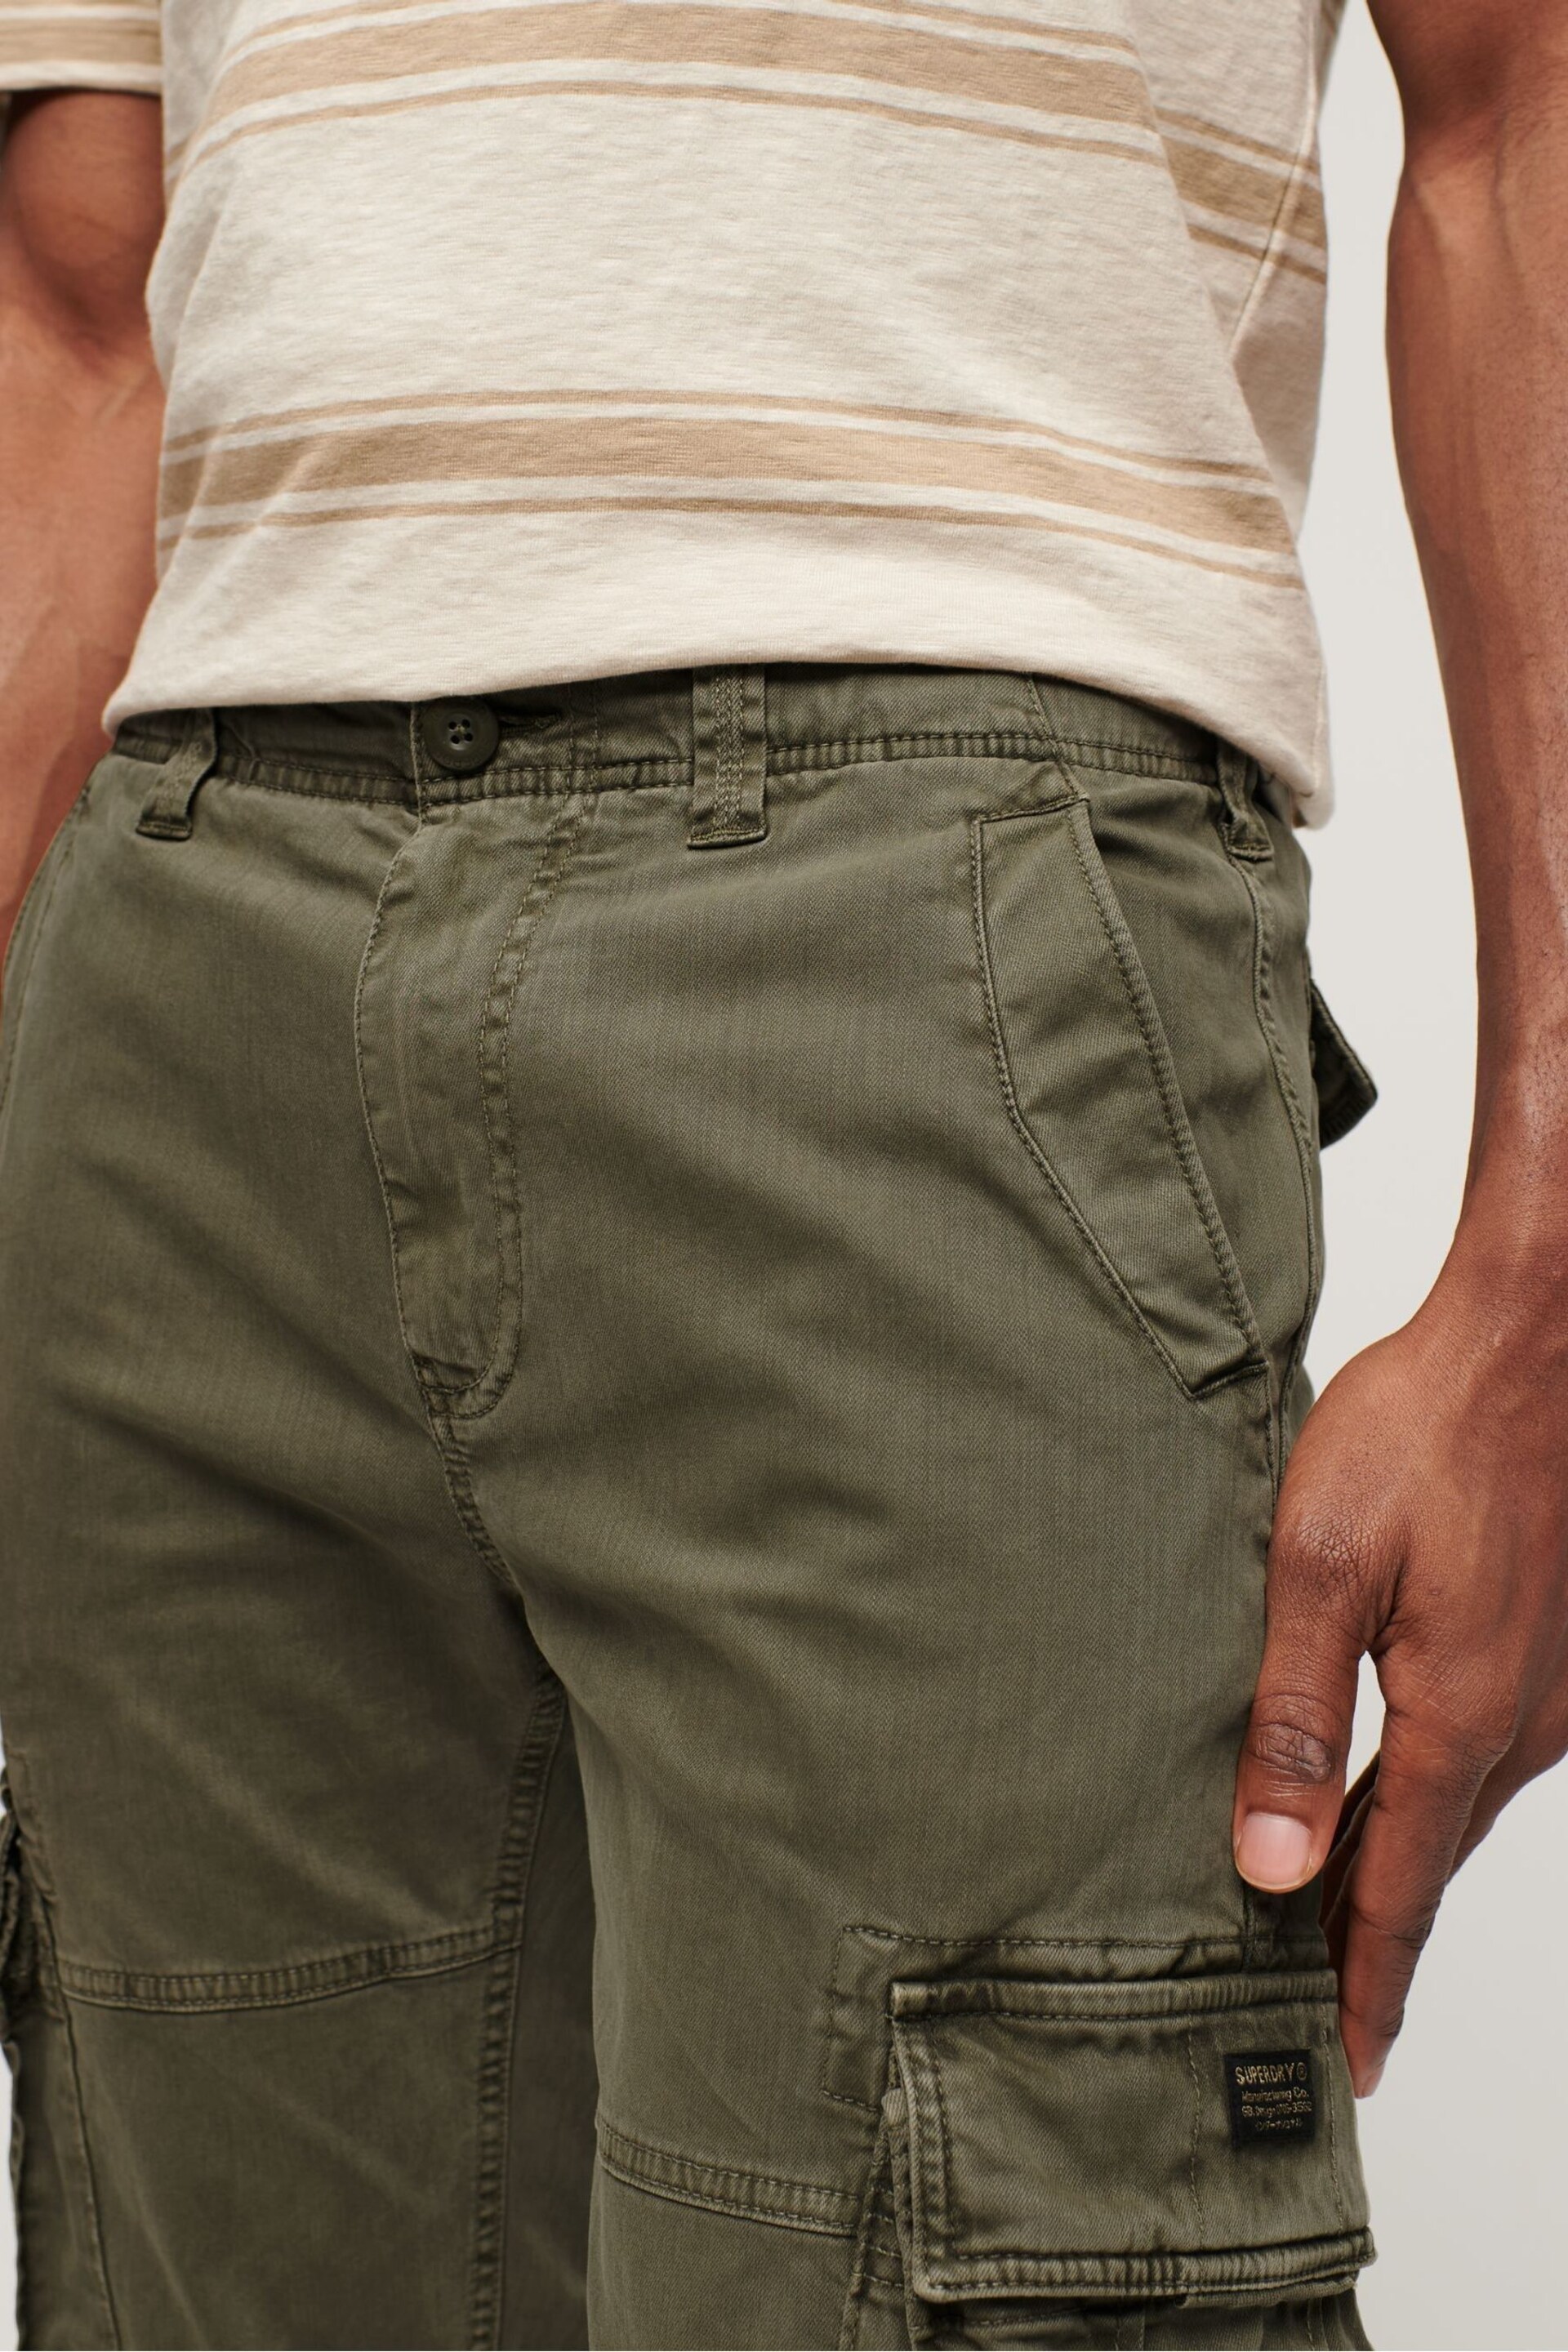 Superdry Green Core Cargo Trousers - Image 4 of 7